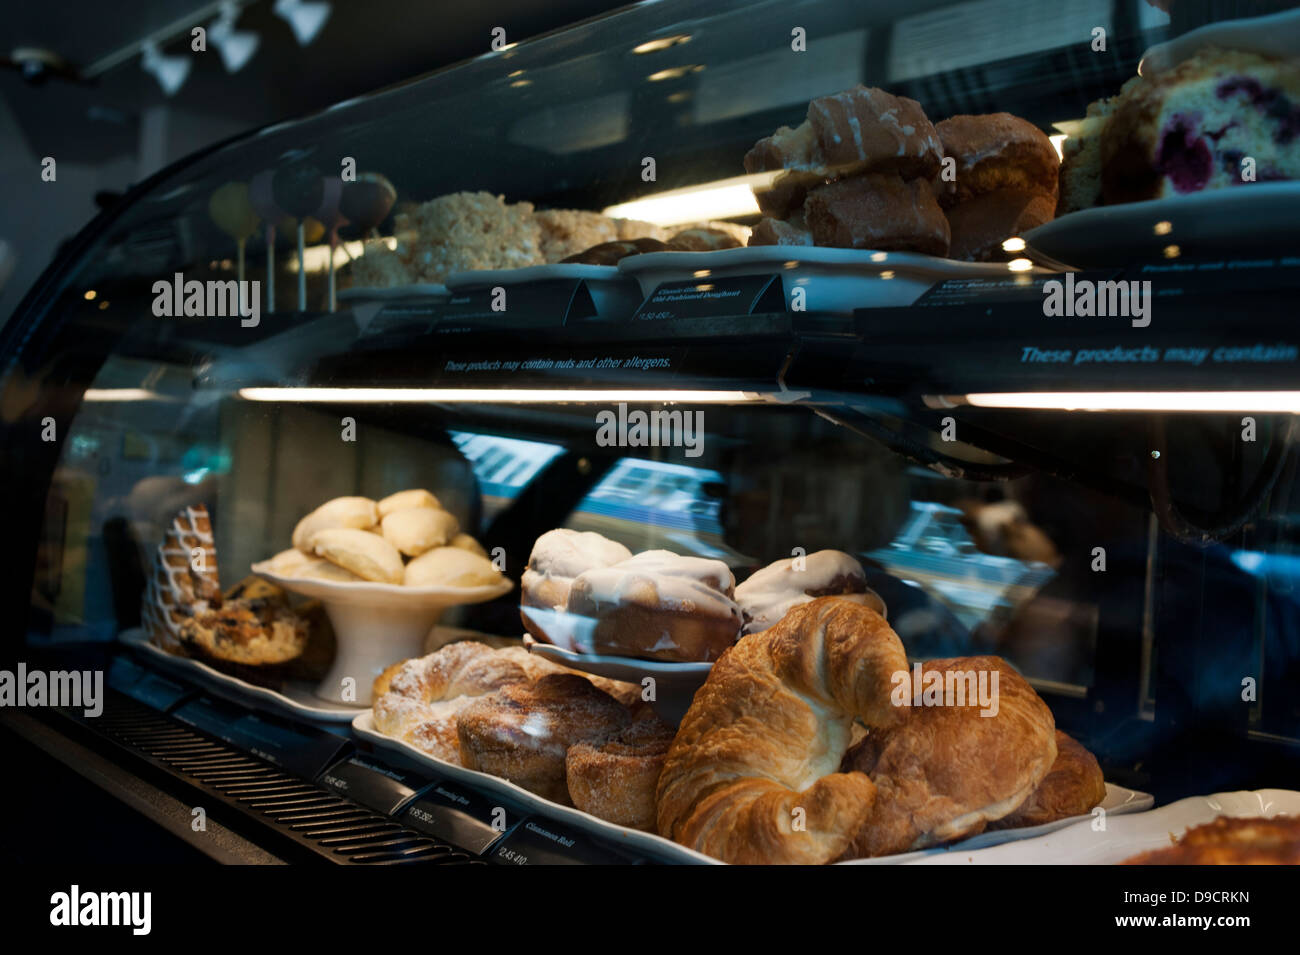 Pastries on display inside of a glass deli counter Stock Photo